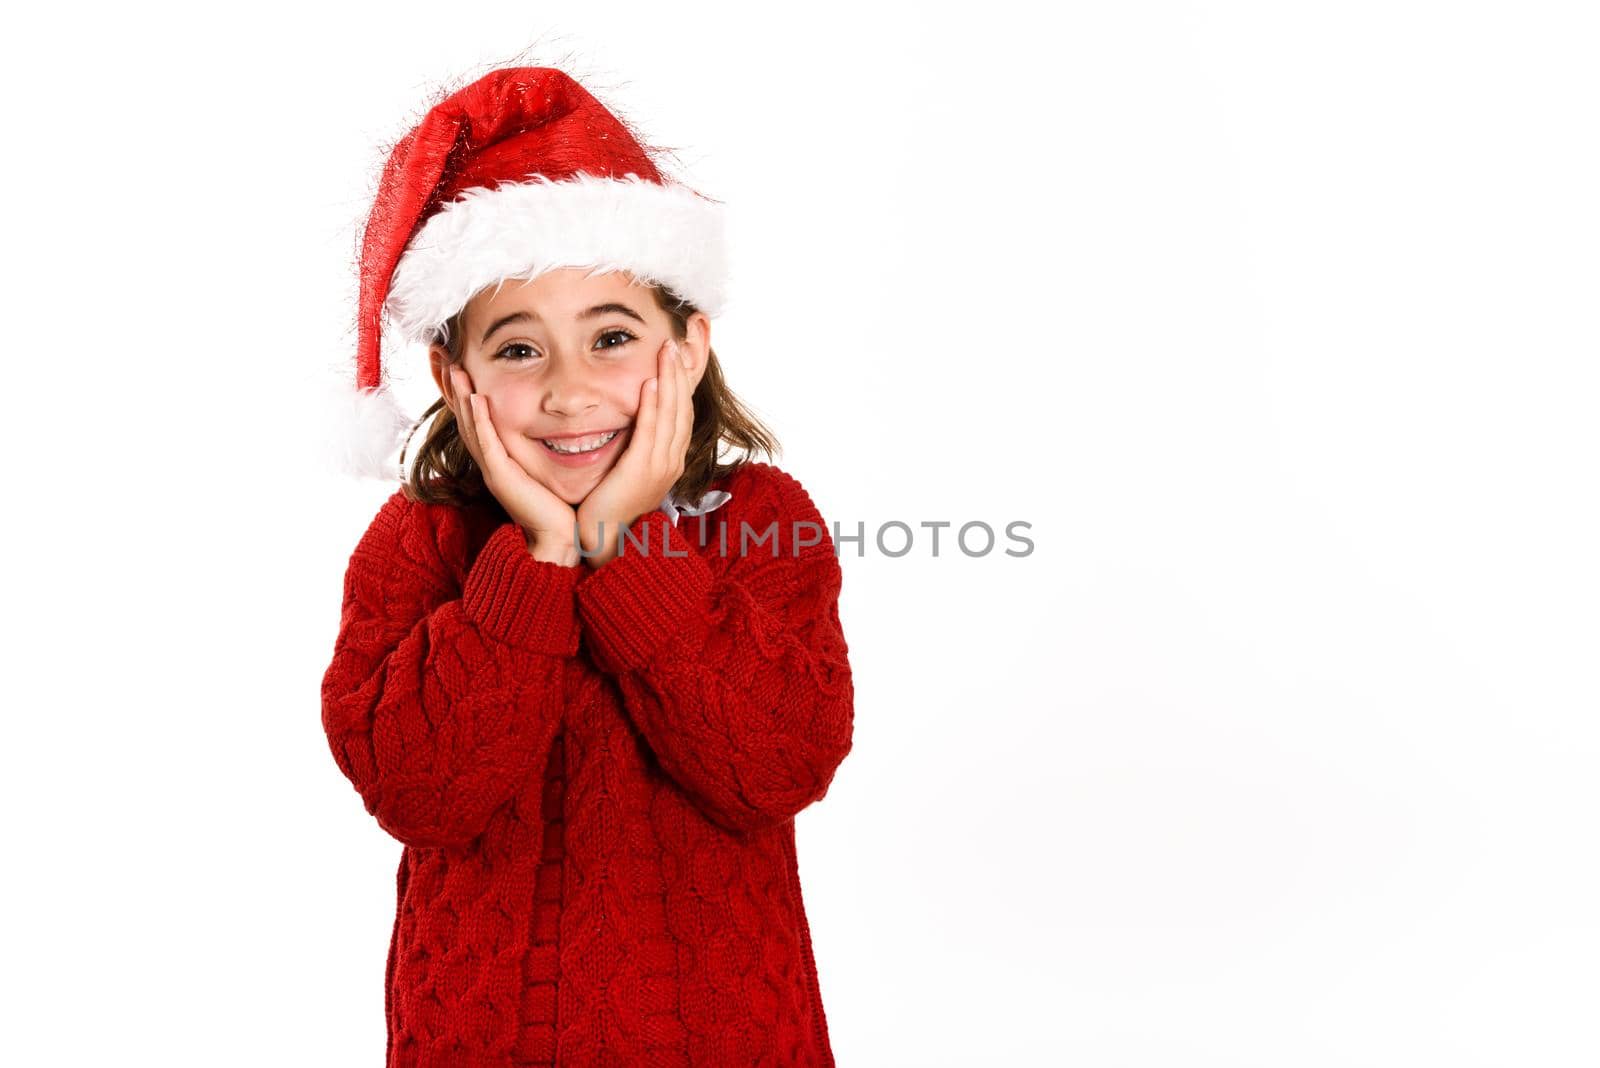 Adorable little girl wearing santa hat isolated on white background. Winter clothes for Christmas